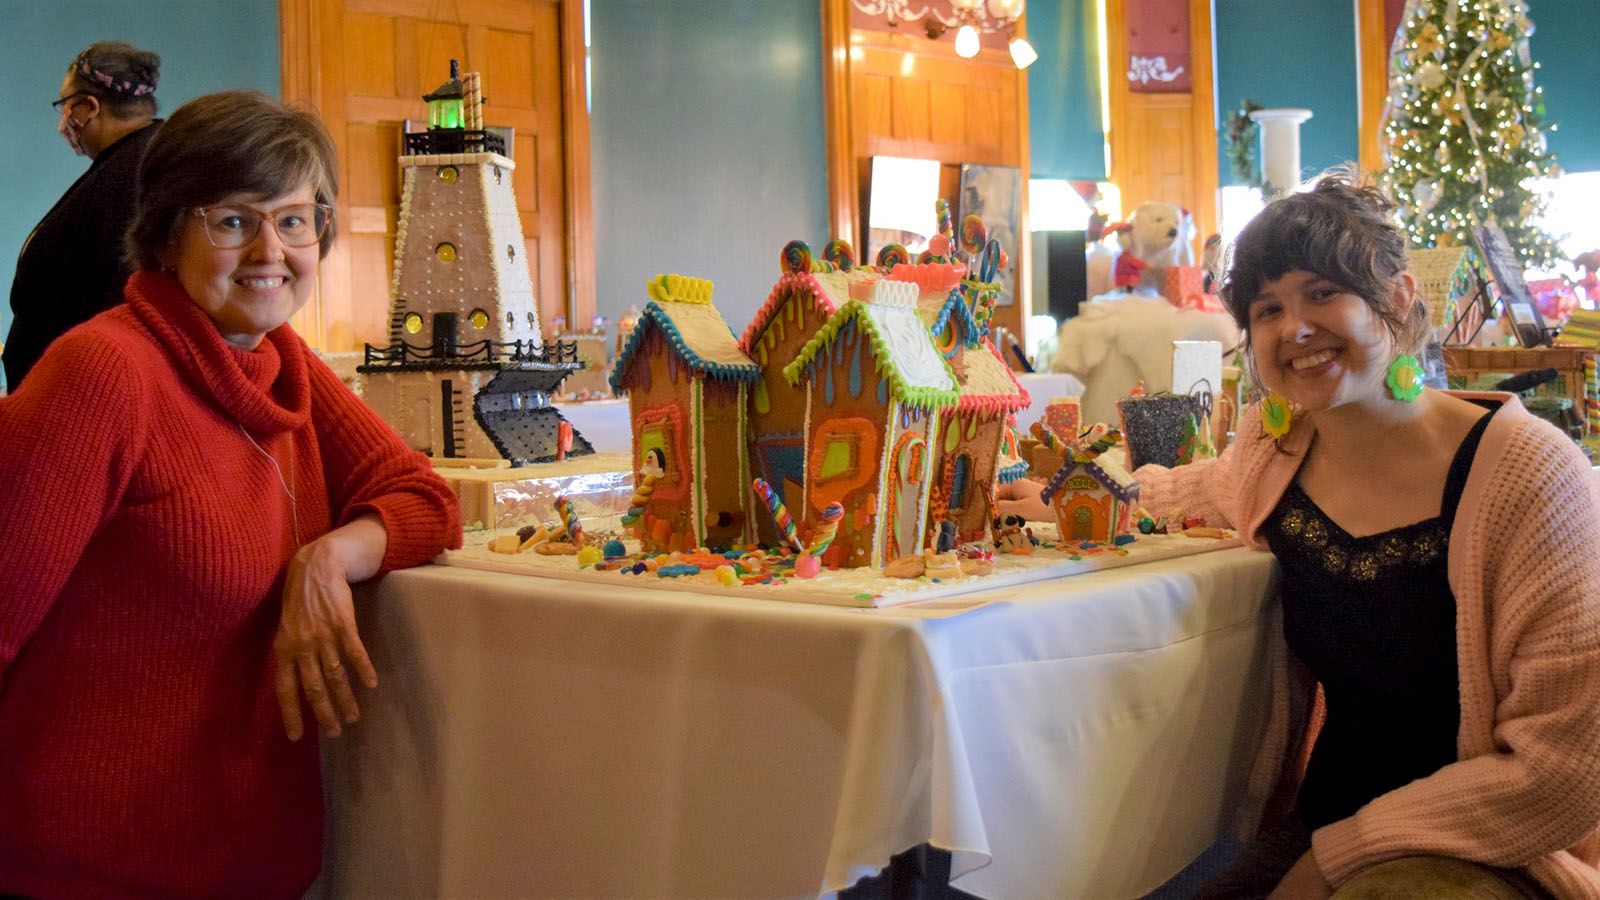 The Festival of Gingerbread exhibit at The History Center opens Nov. 24.